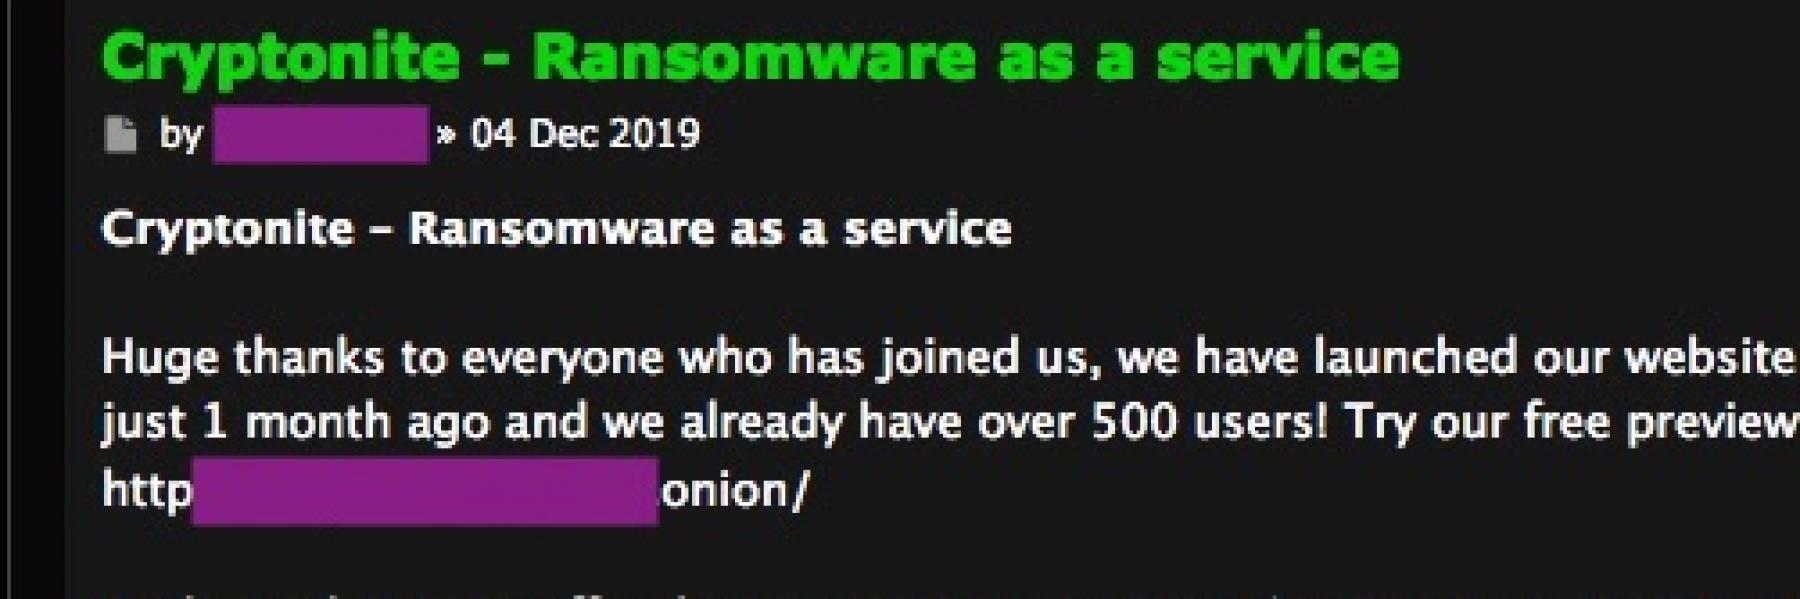 Ransomware-as-a-Service